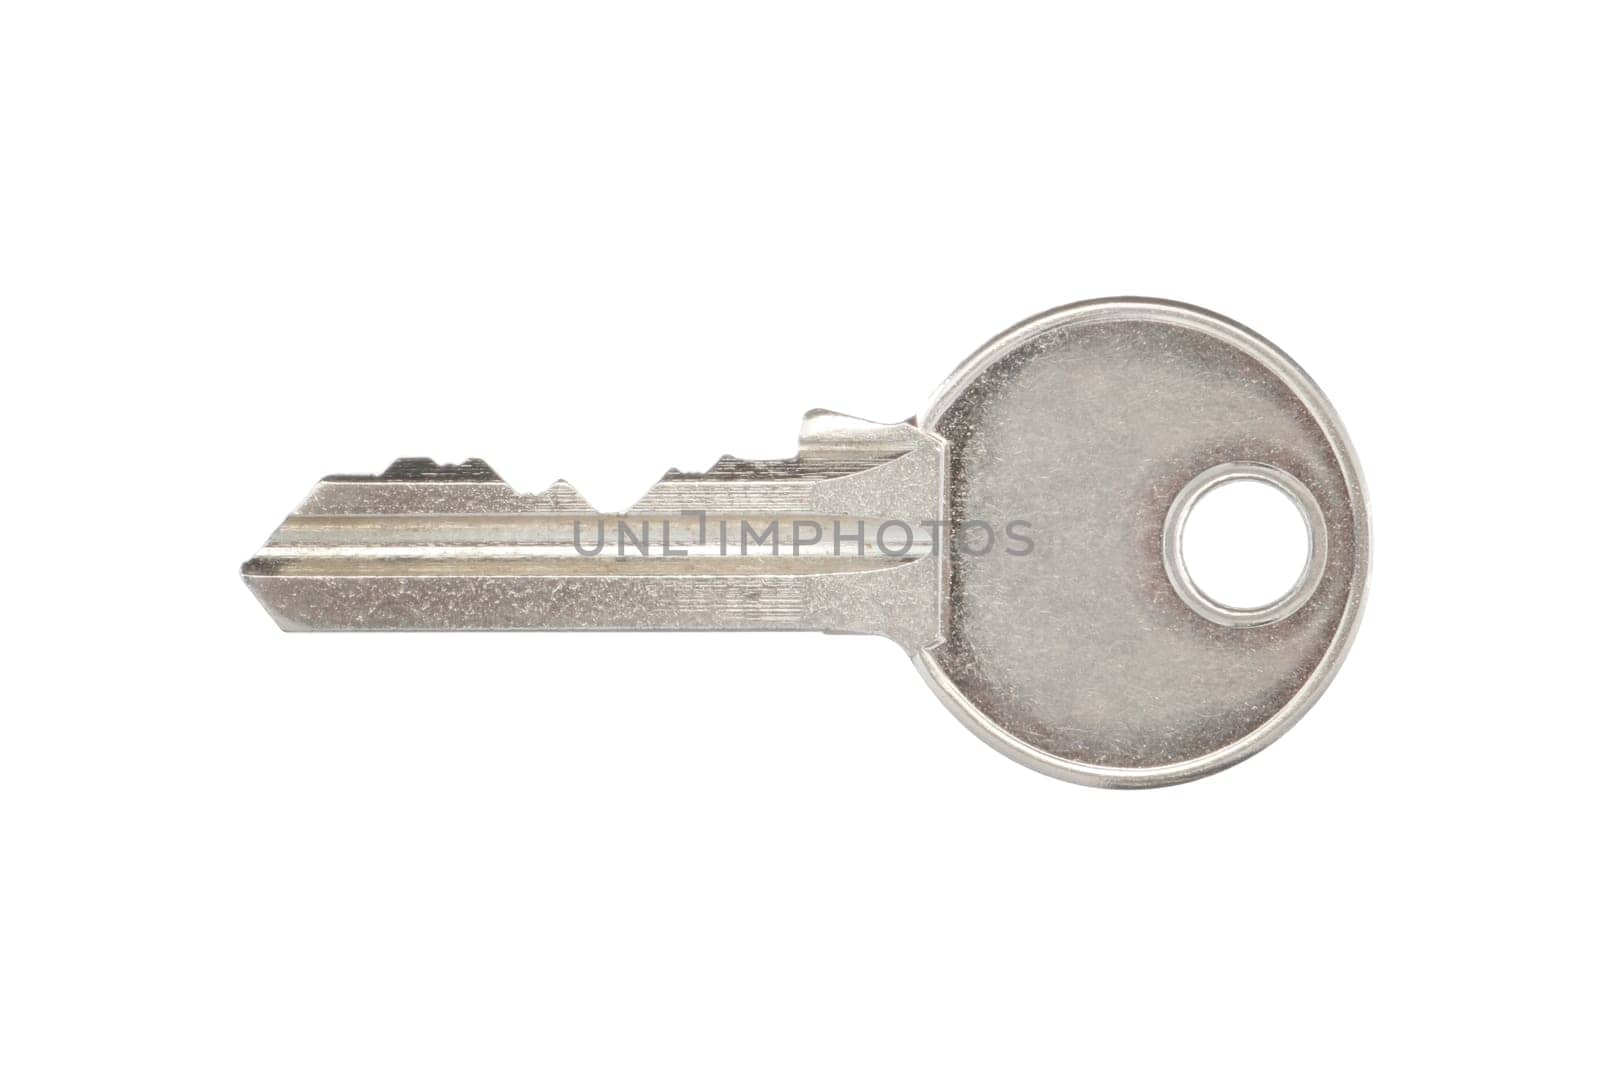 Silver house key with clipping path by VivacityImages